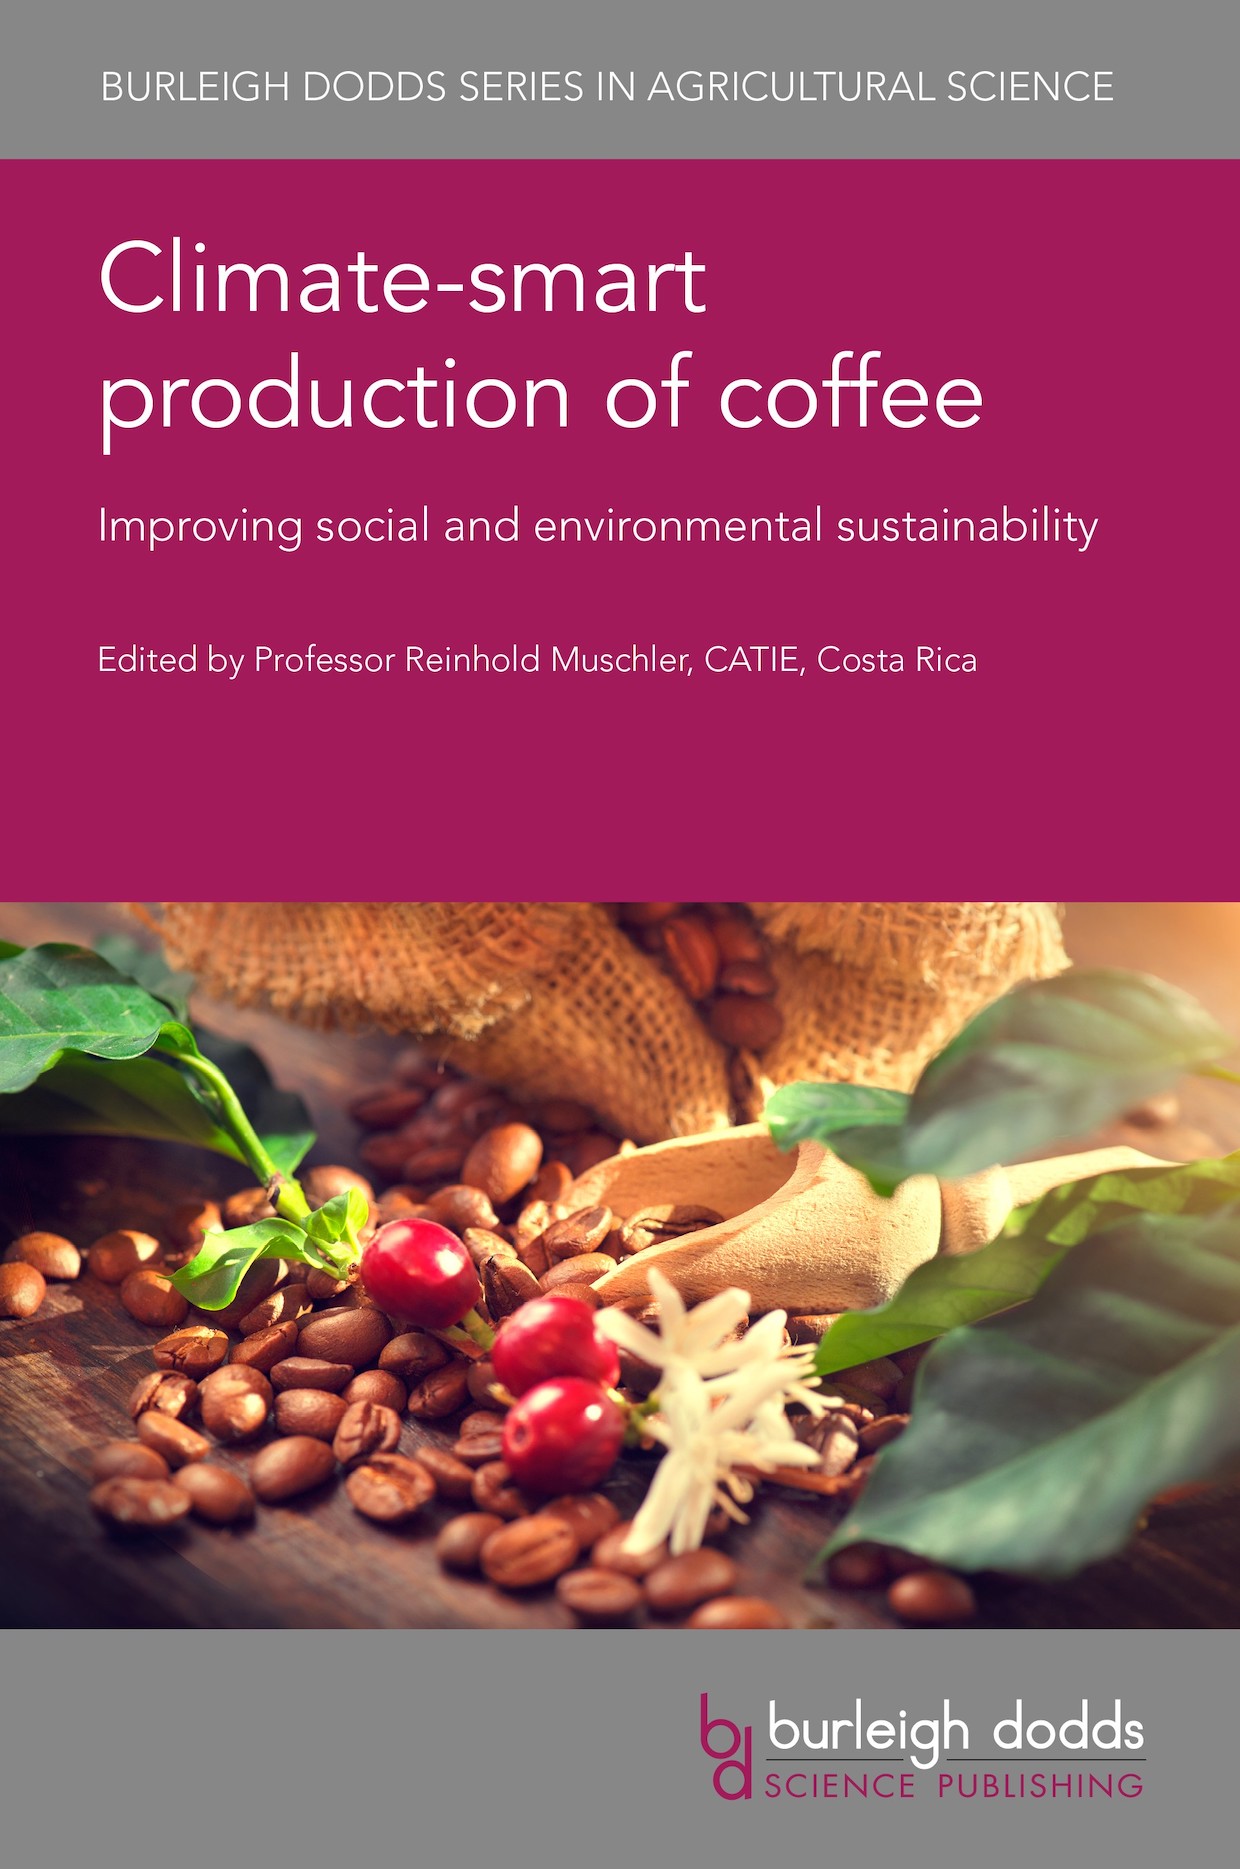 climate-smart production of coffee